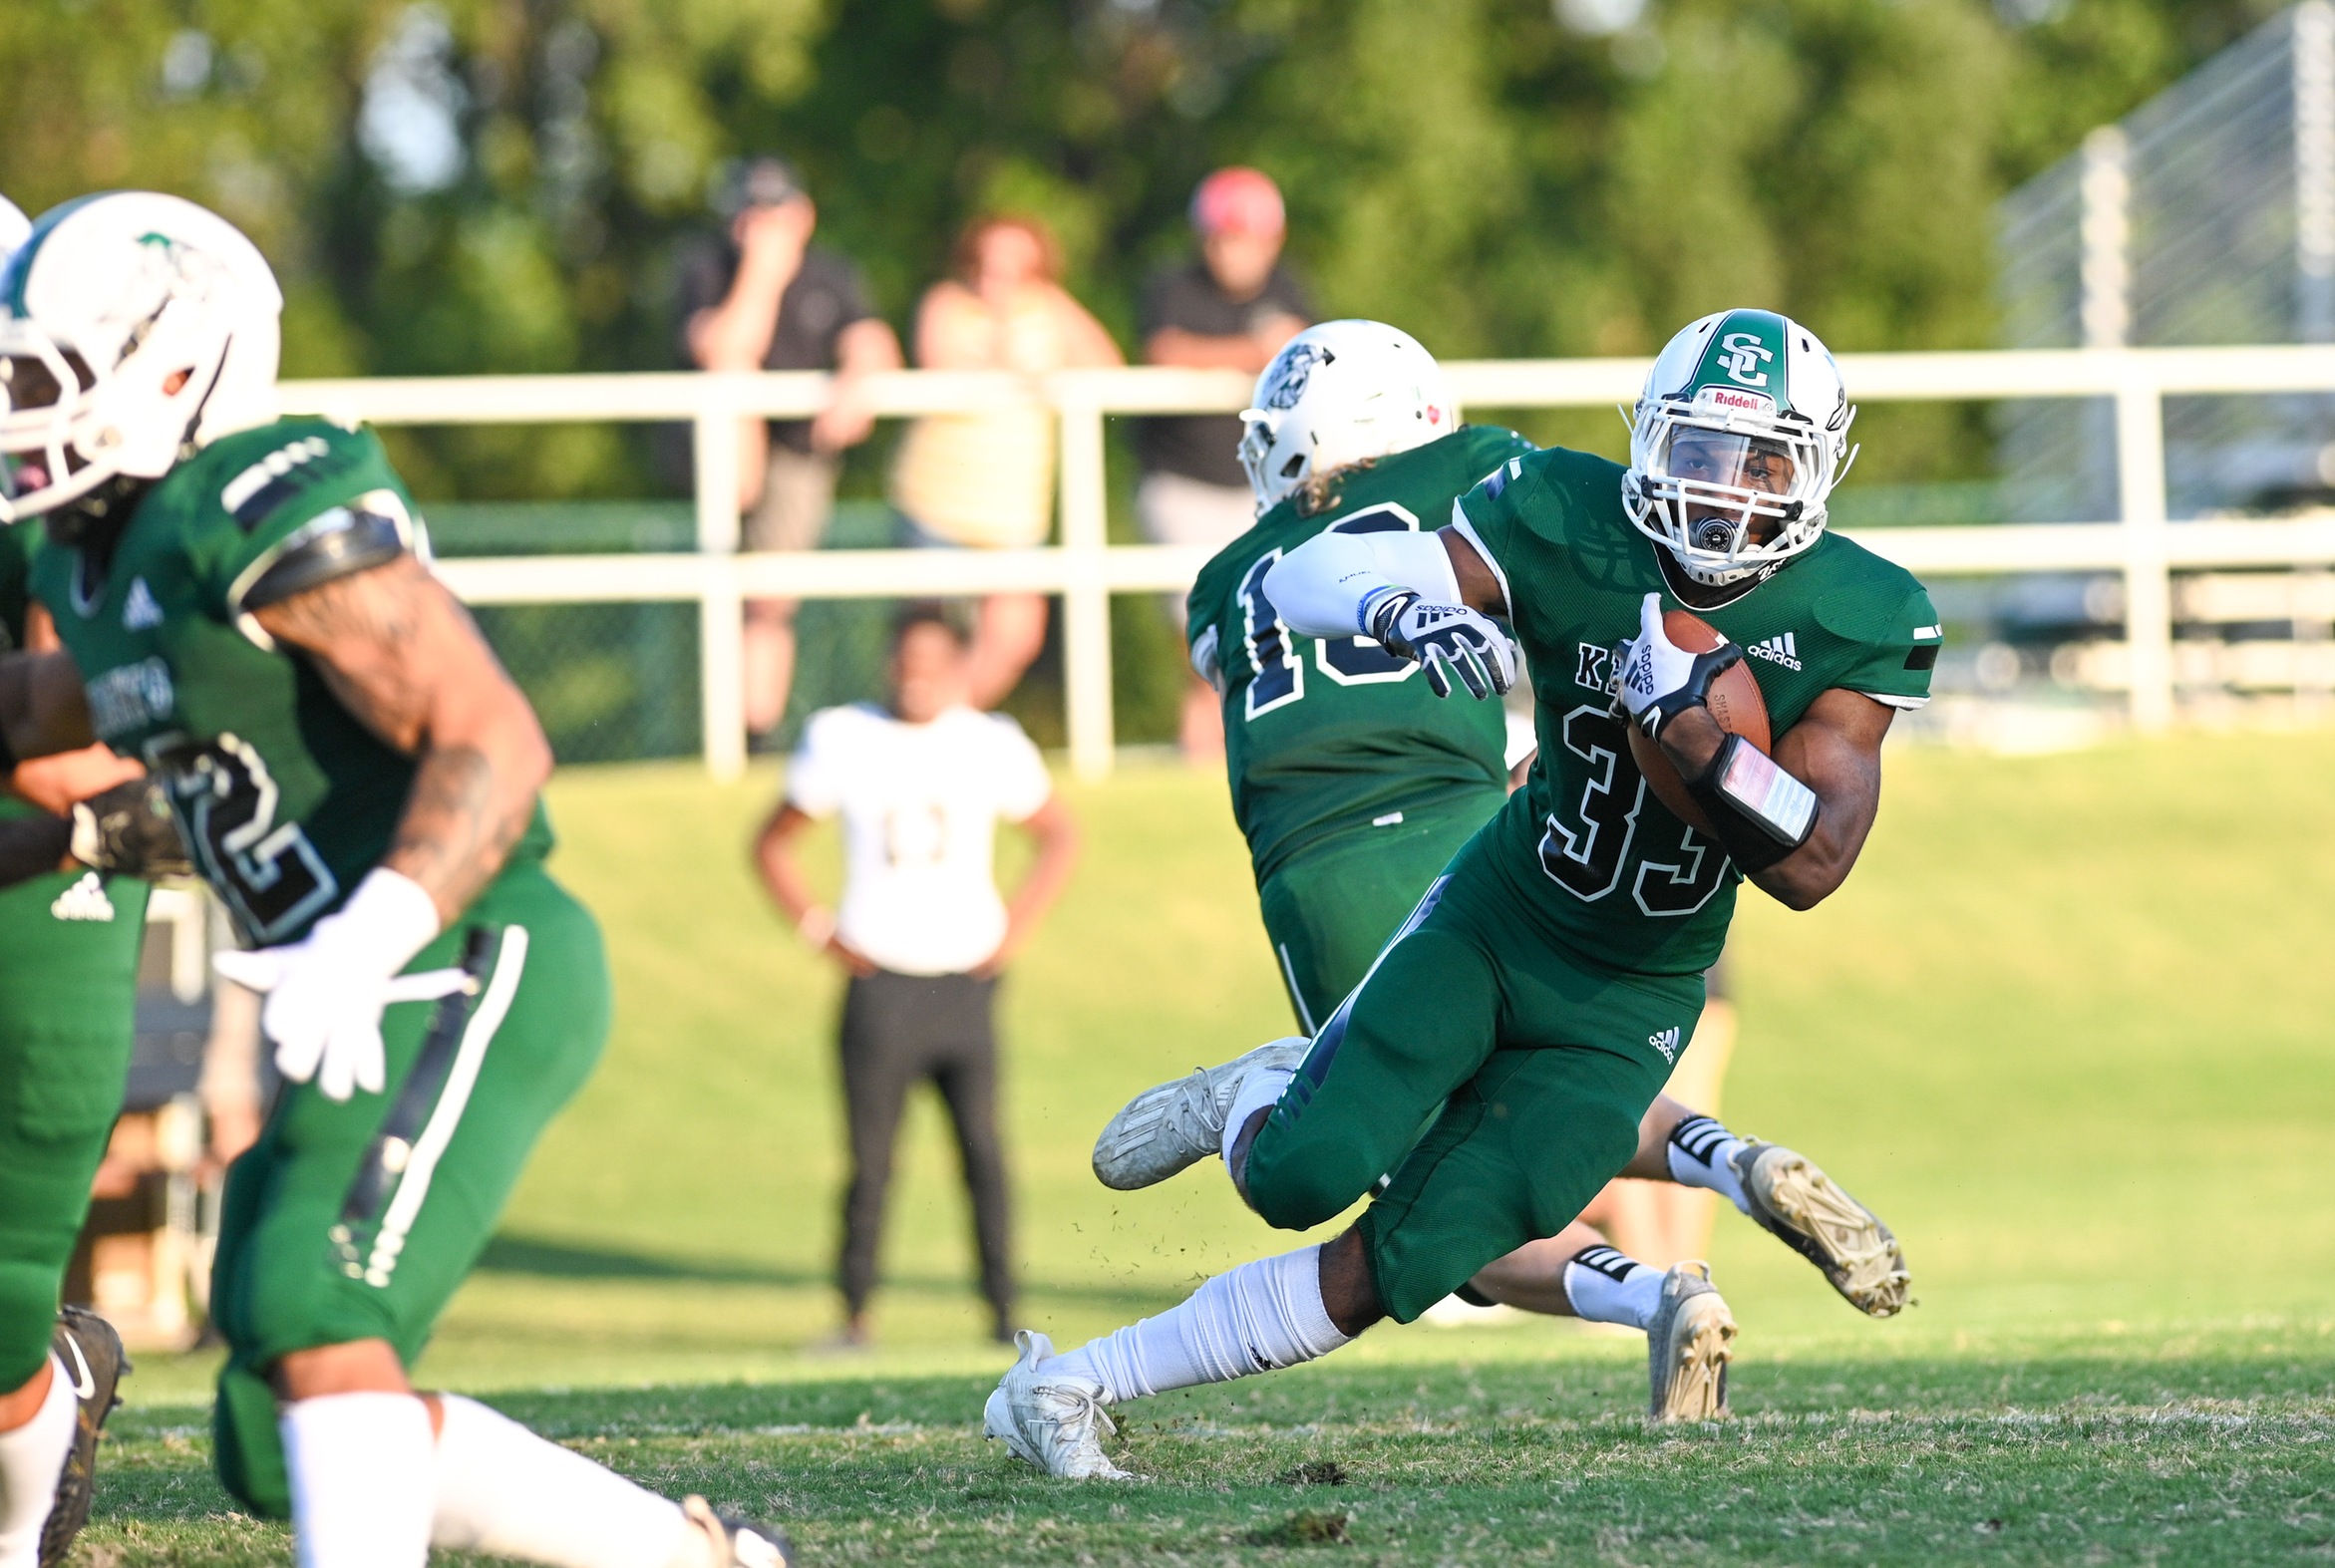 #21 SHASTA COLLEGE FALLS TO LANEY 30-29 TO SUFFER FIRST LOSS